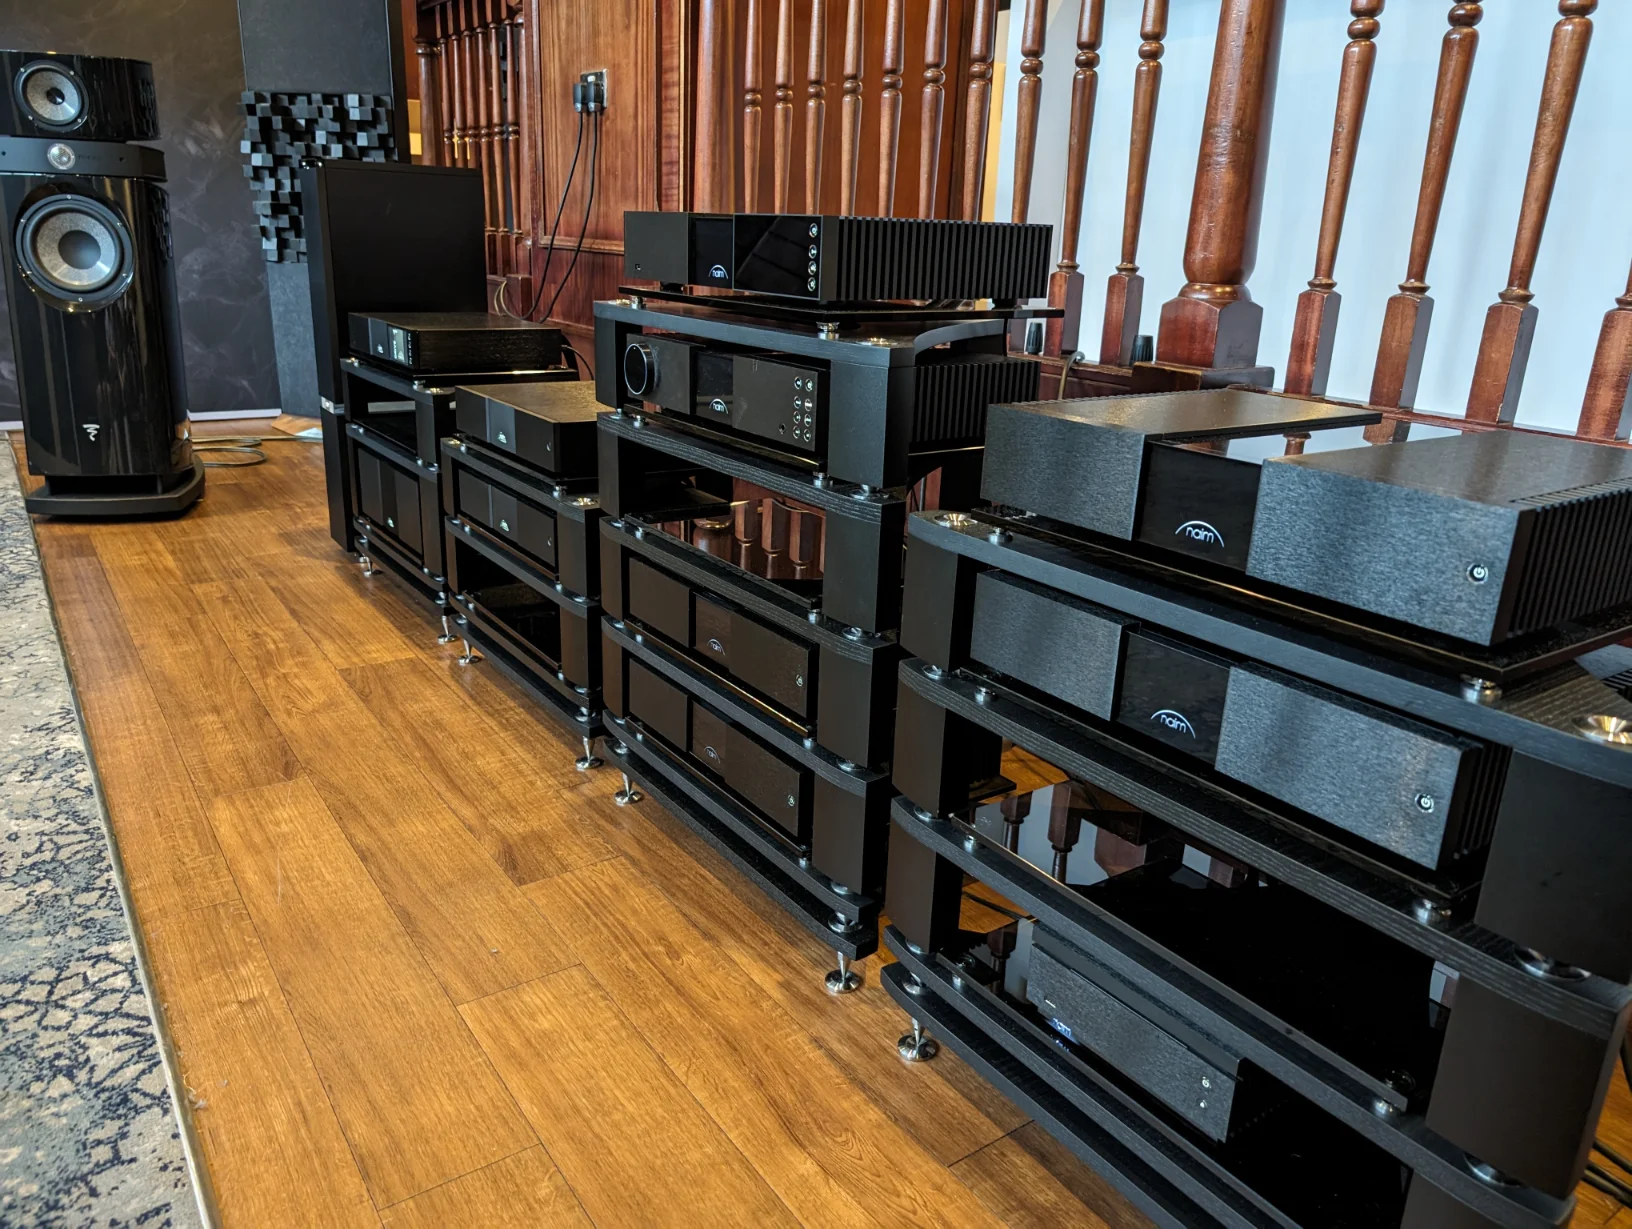 Naim always have one of the most impressive rooms with a big demonstration space with display areas next door and plenty of chatter outside the room with Mark Raggett and Jason Gould.